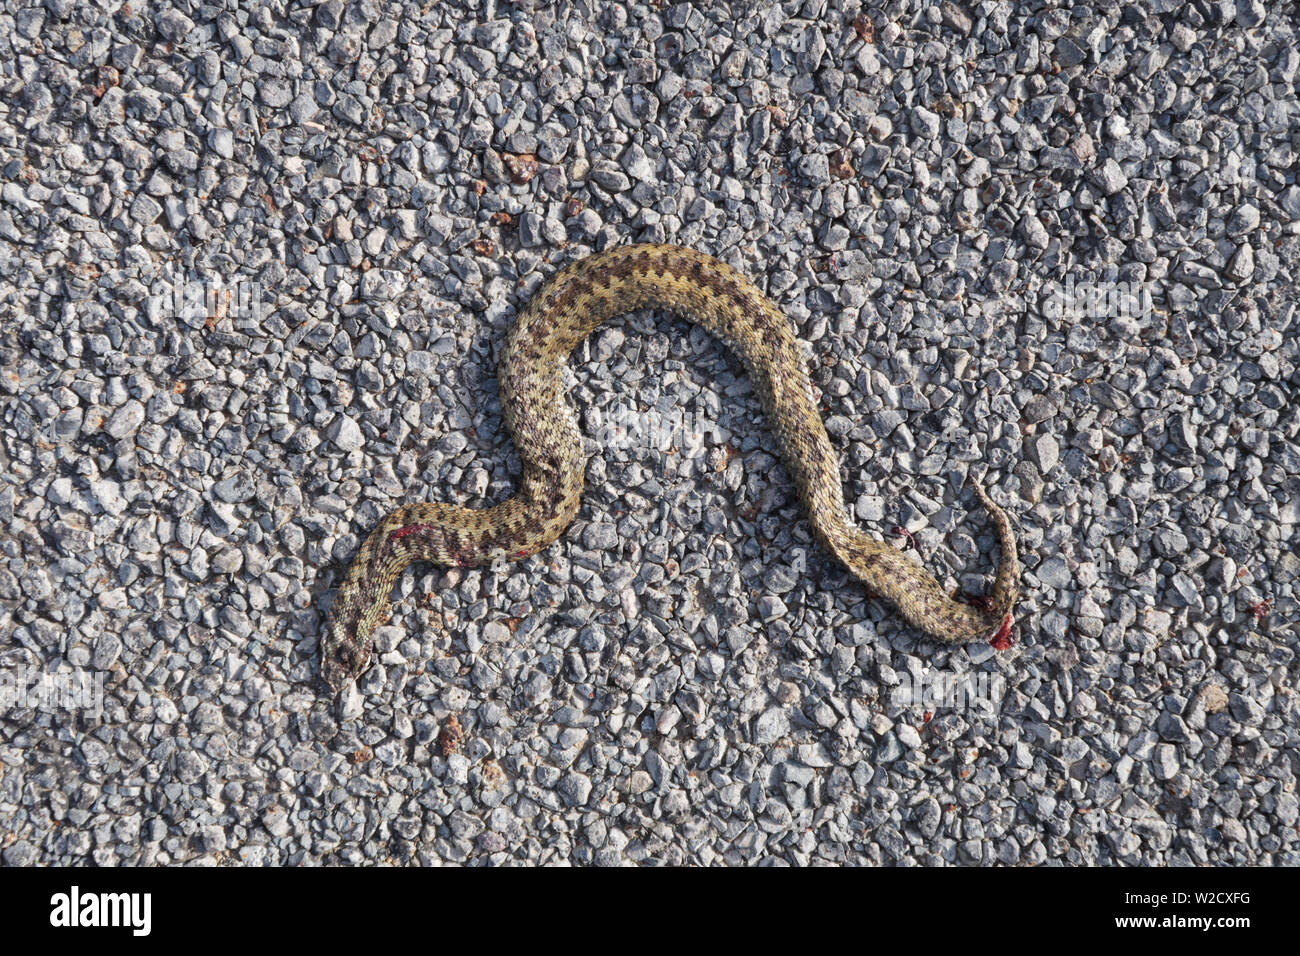 Common European adder. Latin name Vipera berus, also known as viper, roadkill victim flattened by passing vehicle showing scales and markings Stock Photo